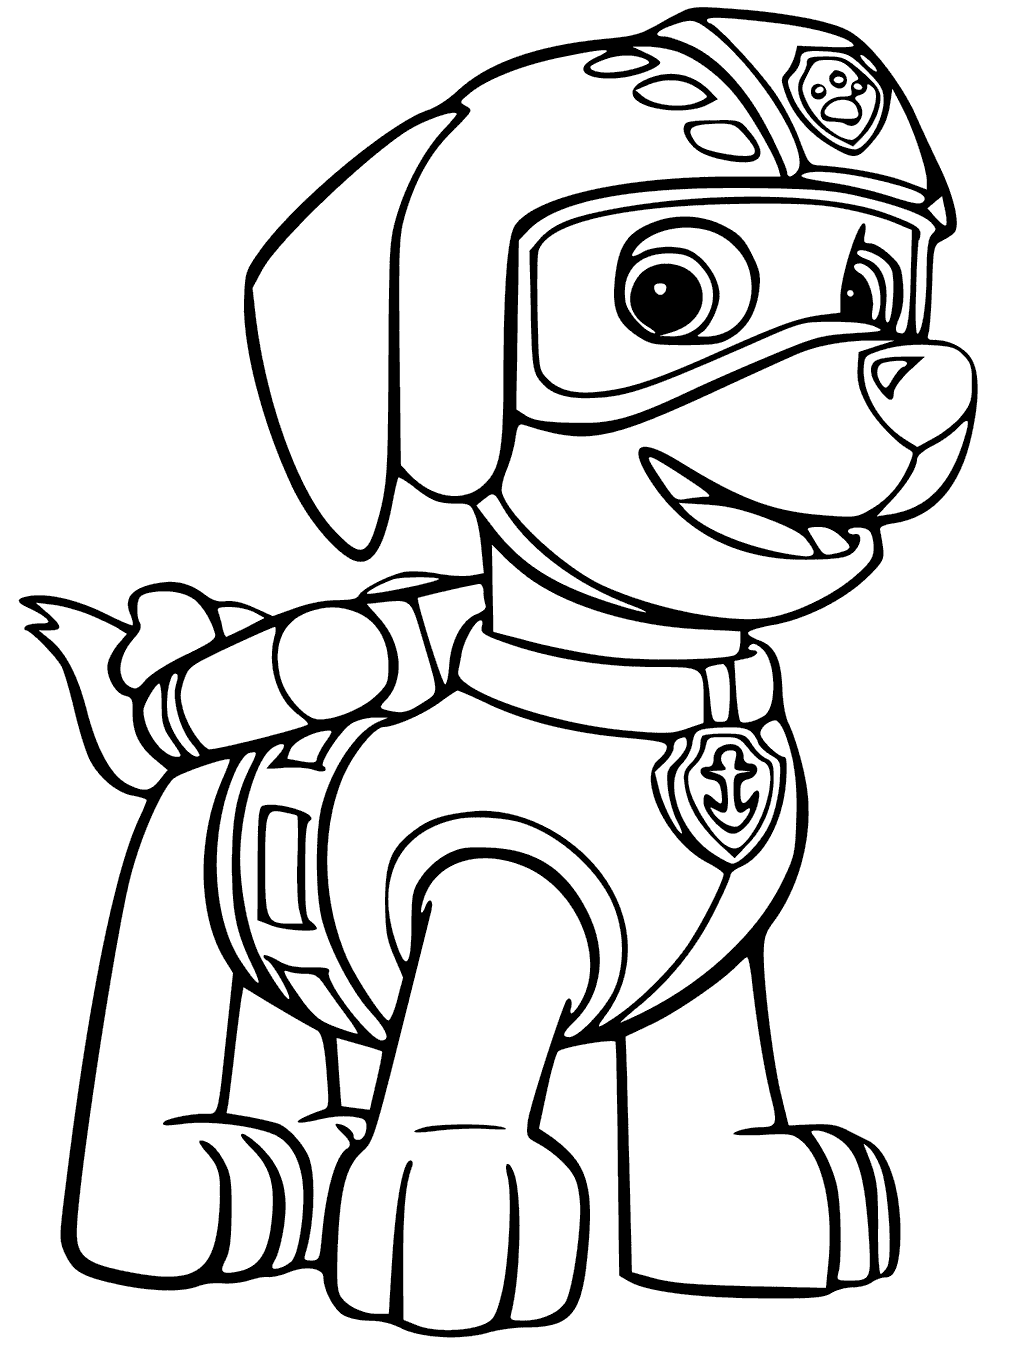 paw patrol zuma the best free zuma coloring page images download from 111 paw patrol zuma 